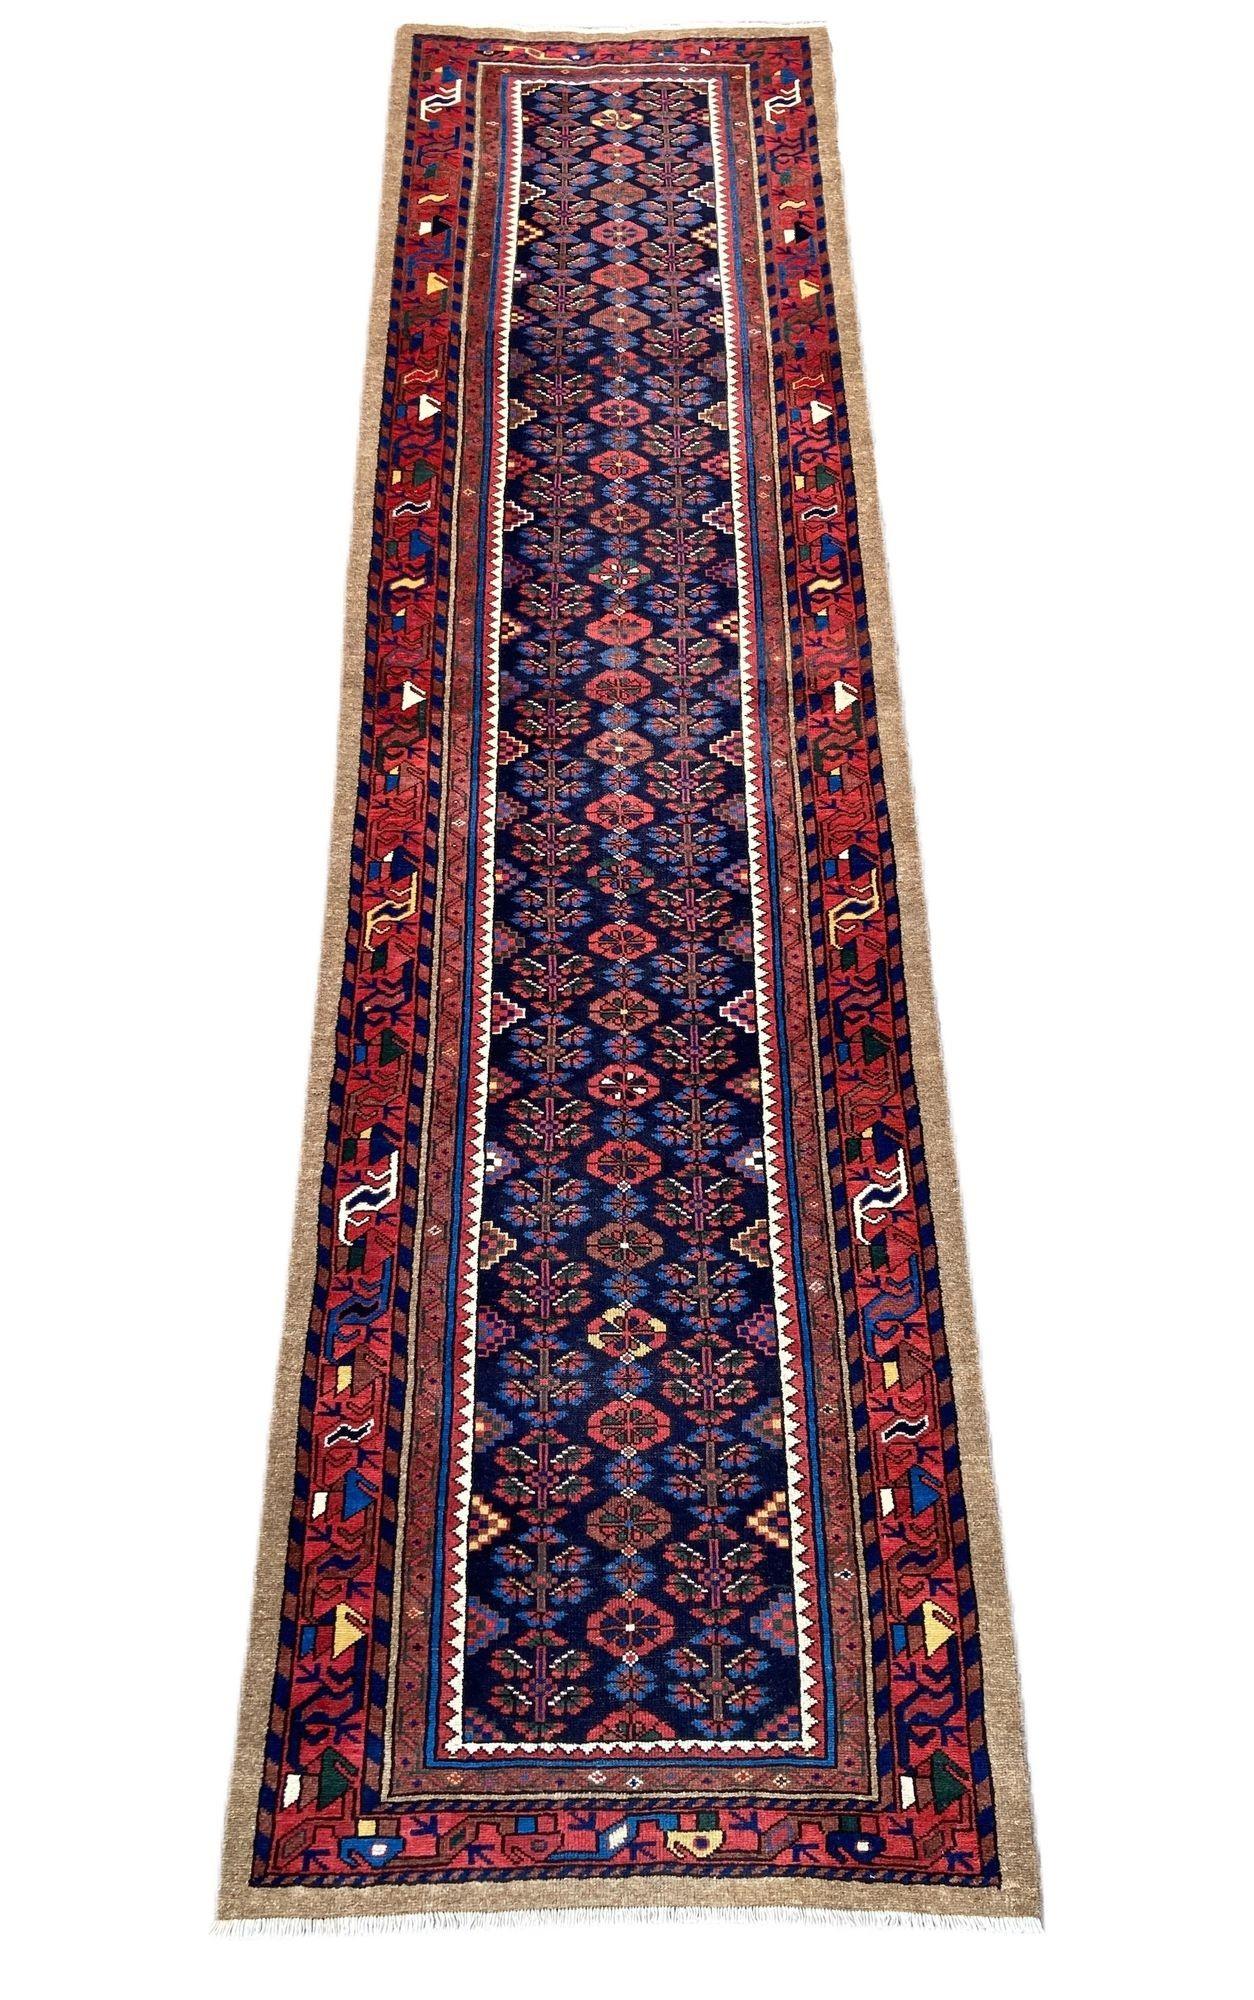 A wonderful antique Hamadan runner, handwoven in west Persia circa 1910 with an all over design of stylised flowers on a rich indigo field and red border. Lovely wool quality and fabulous secondary colours.


Size: 4.05m x 1.05m (13ft 4in x 3ft